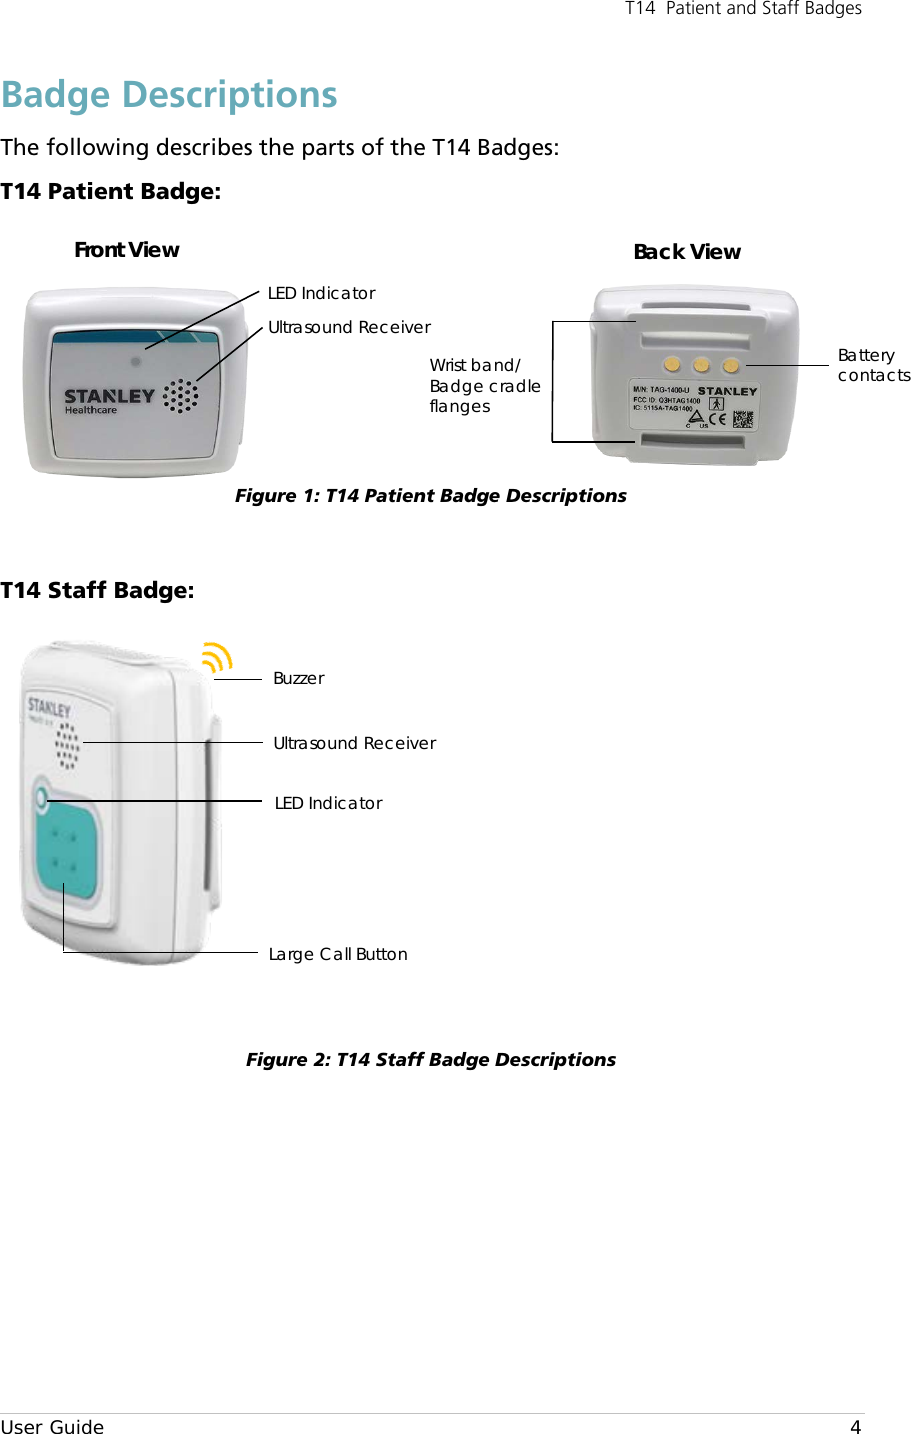 T14  Patient and Staff Badges  User Guide     4 Badge Descriptions The following describes the parts of the T14 Badges: T14 Patient Badge:       Figure 1: T14 Patient Badge Descriptions  T14 Staff Badge:   Figure 2: T14 Staff Badge Descriptions        Front View Back View LED Indicator Ultrasound Receiver  Wrist band/ Badge cradle flanges Battery contacts Large Call Button Ultrasound Receiver LED Indicator Buzzer 